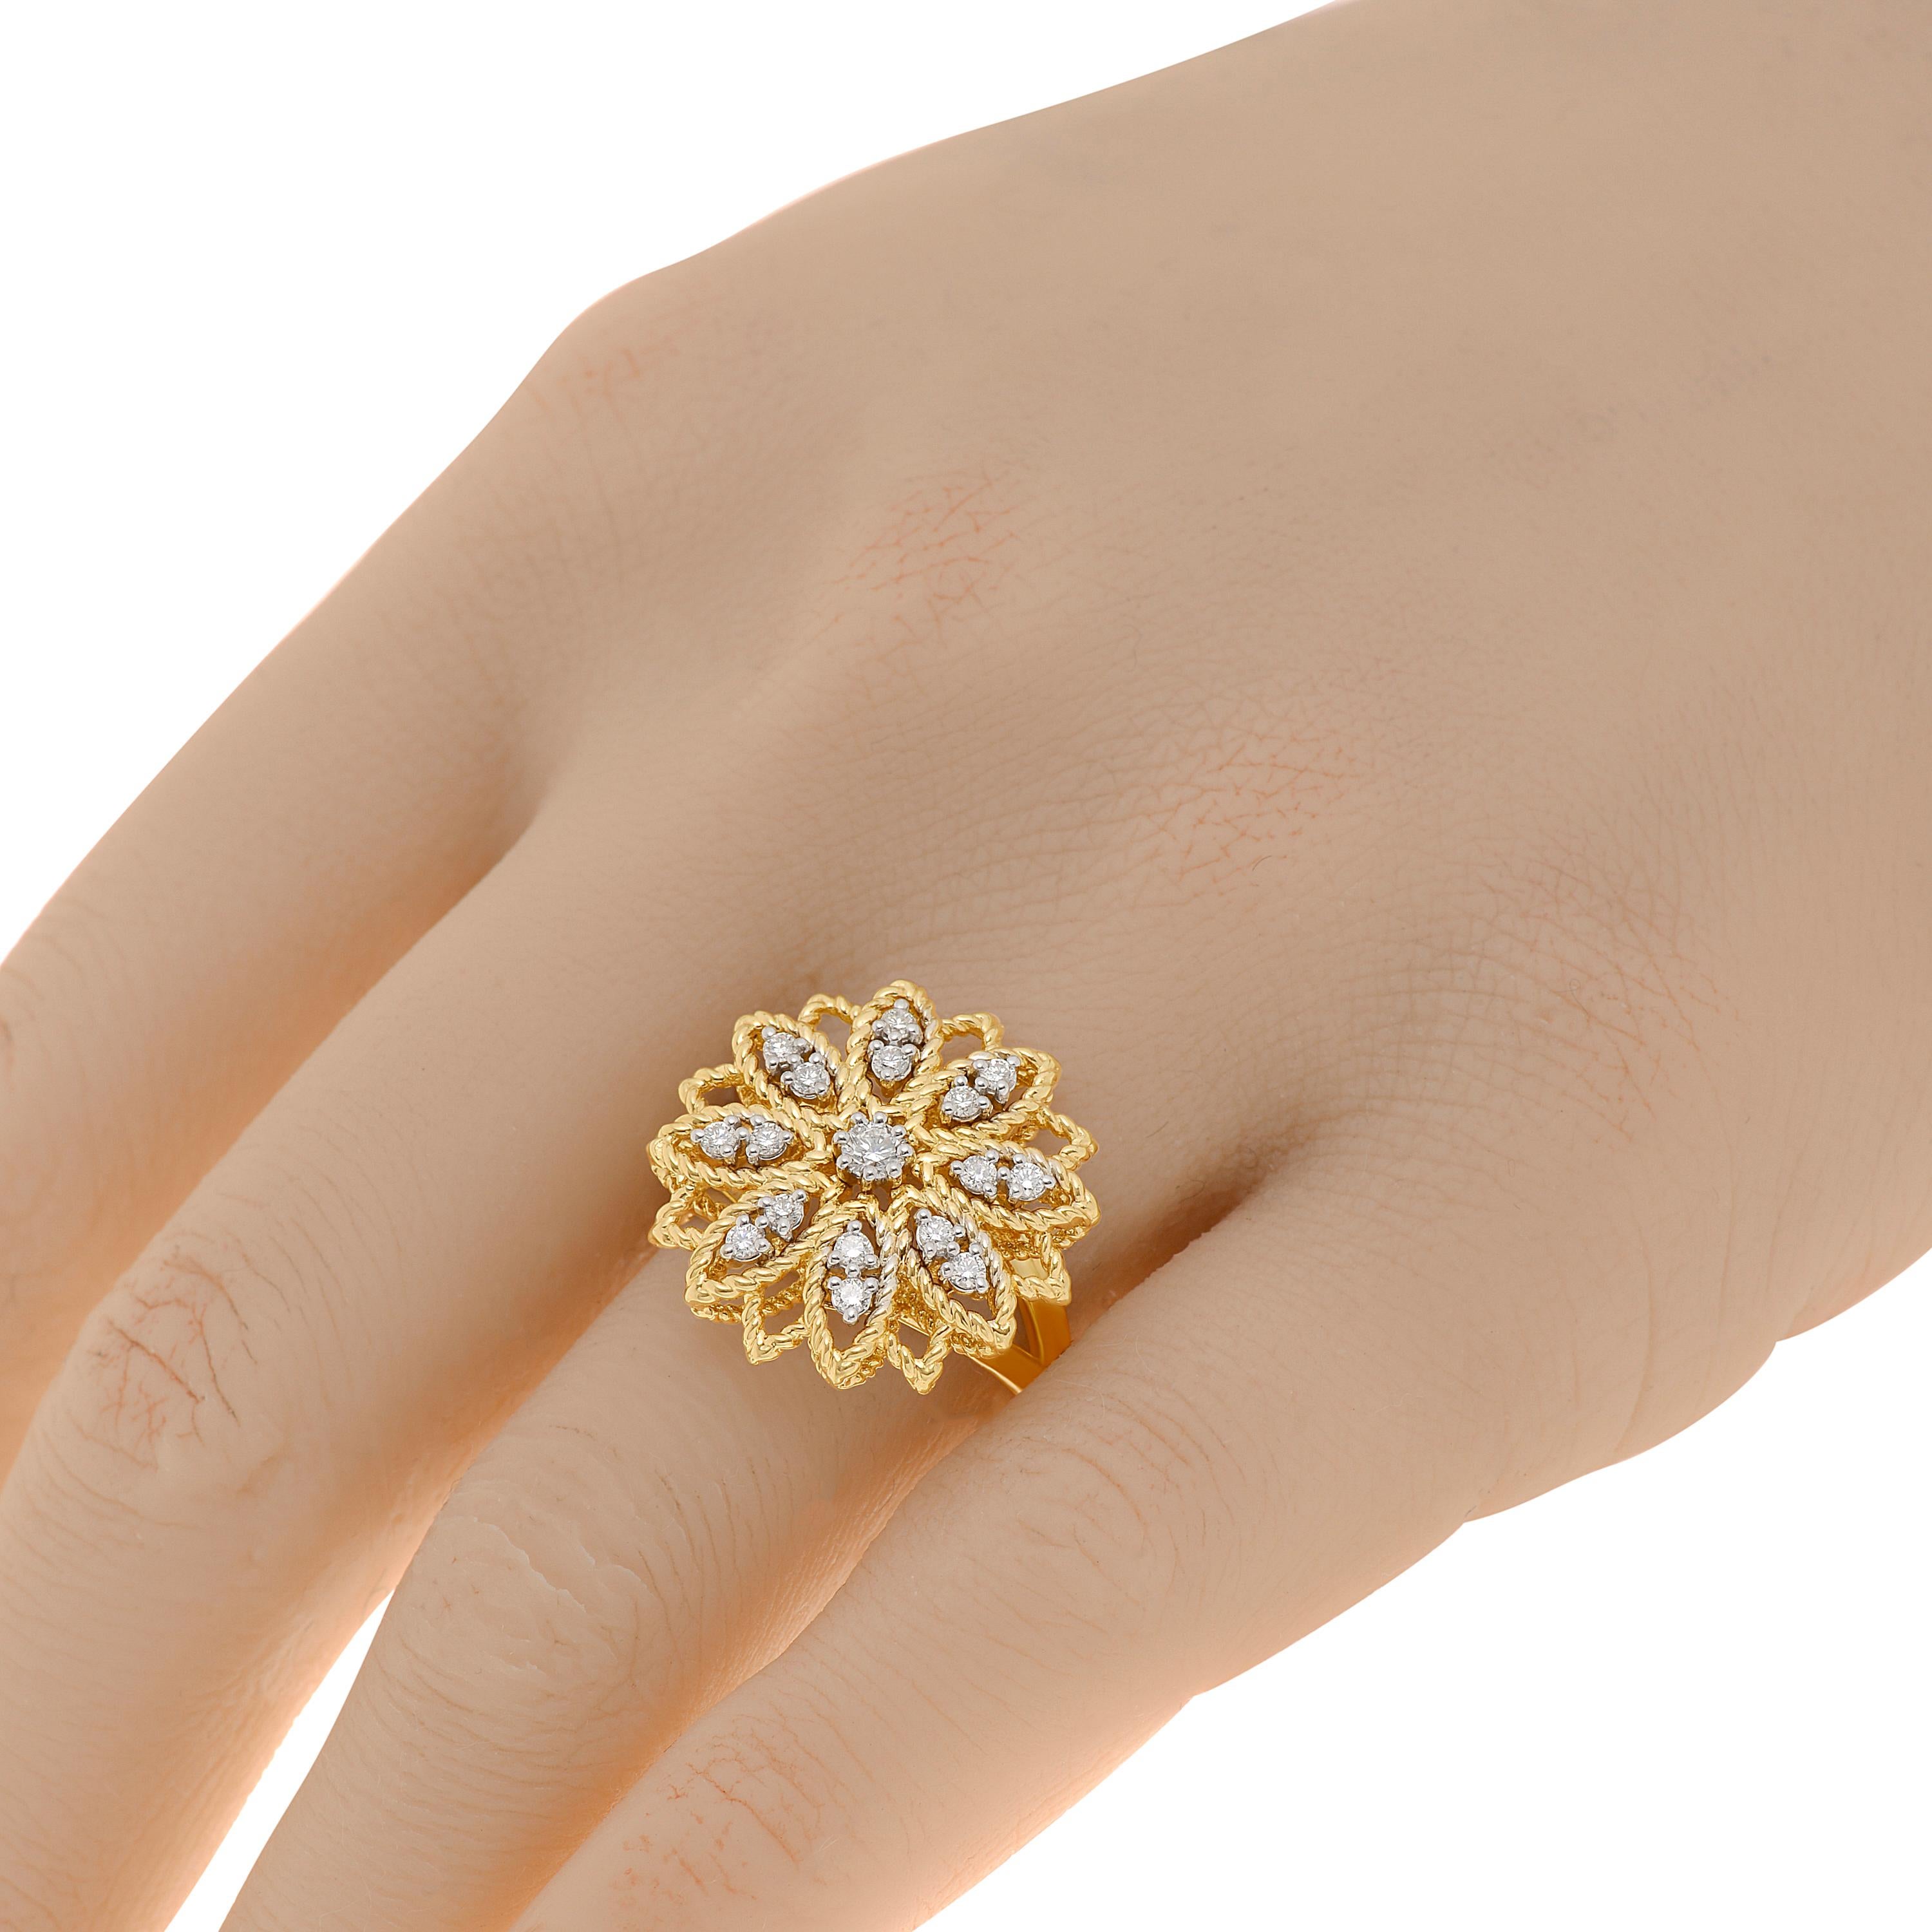 Roberto Coin 18K yellow and white gold cocktail ring features approximately 0.40ct. tw. diamonds. The ring size is 7 (54.4). The decoration size is 3/4